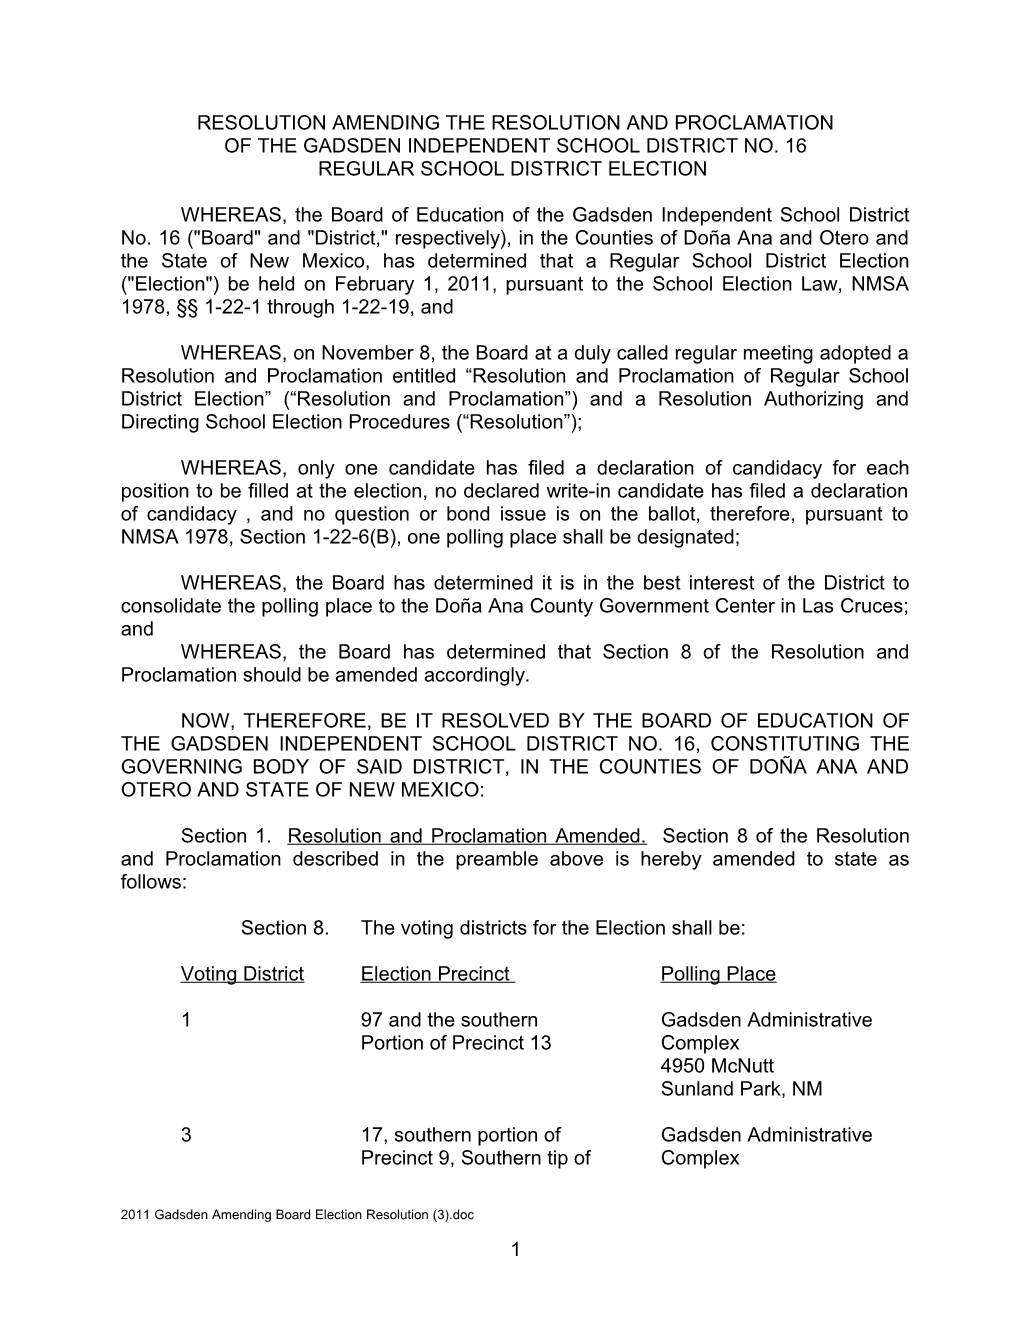 Resolution Amending the Resolution and Proclamation